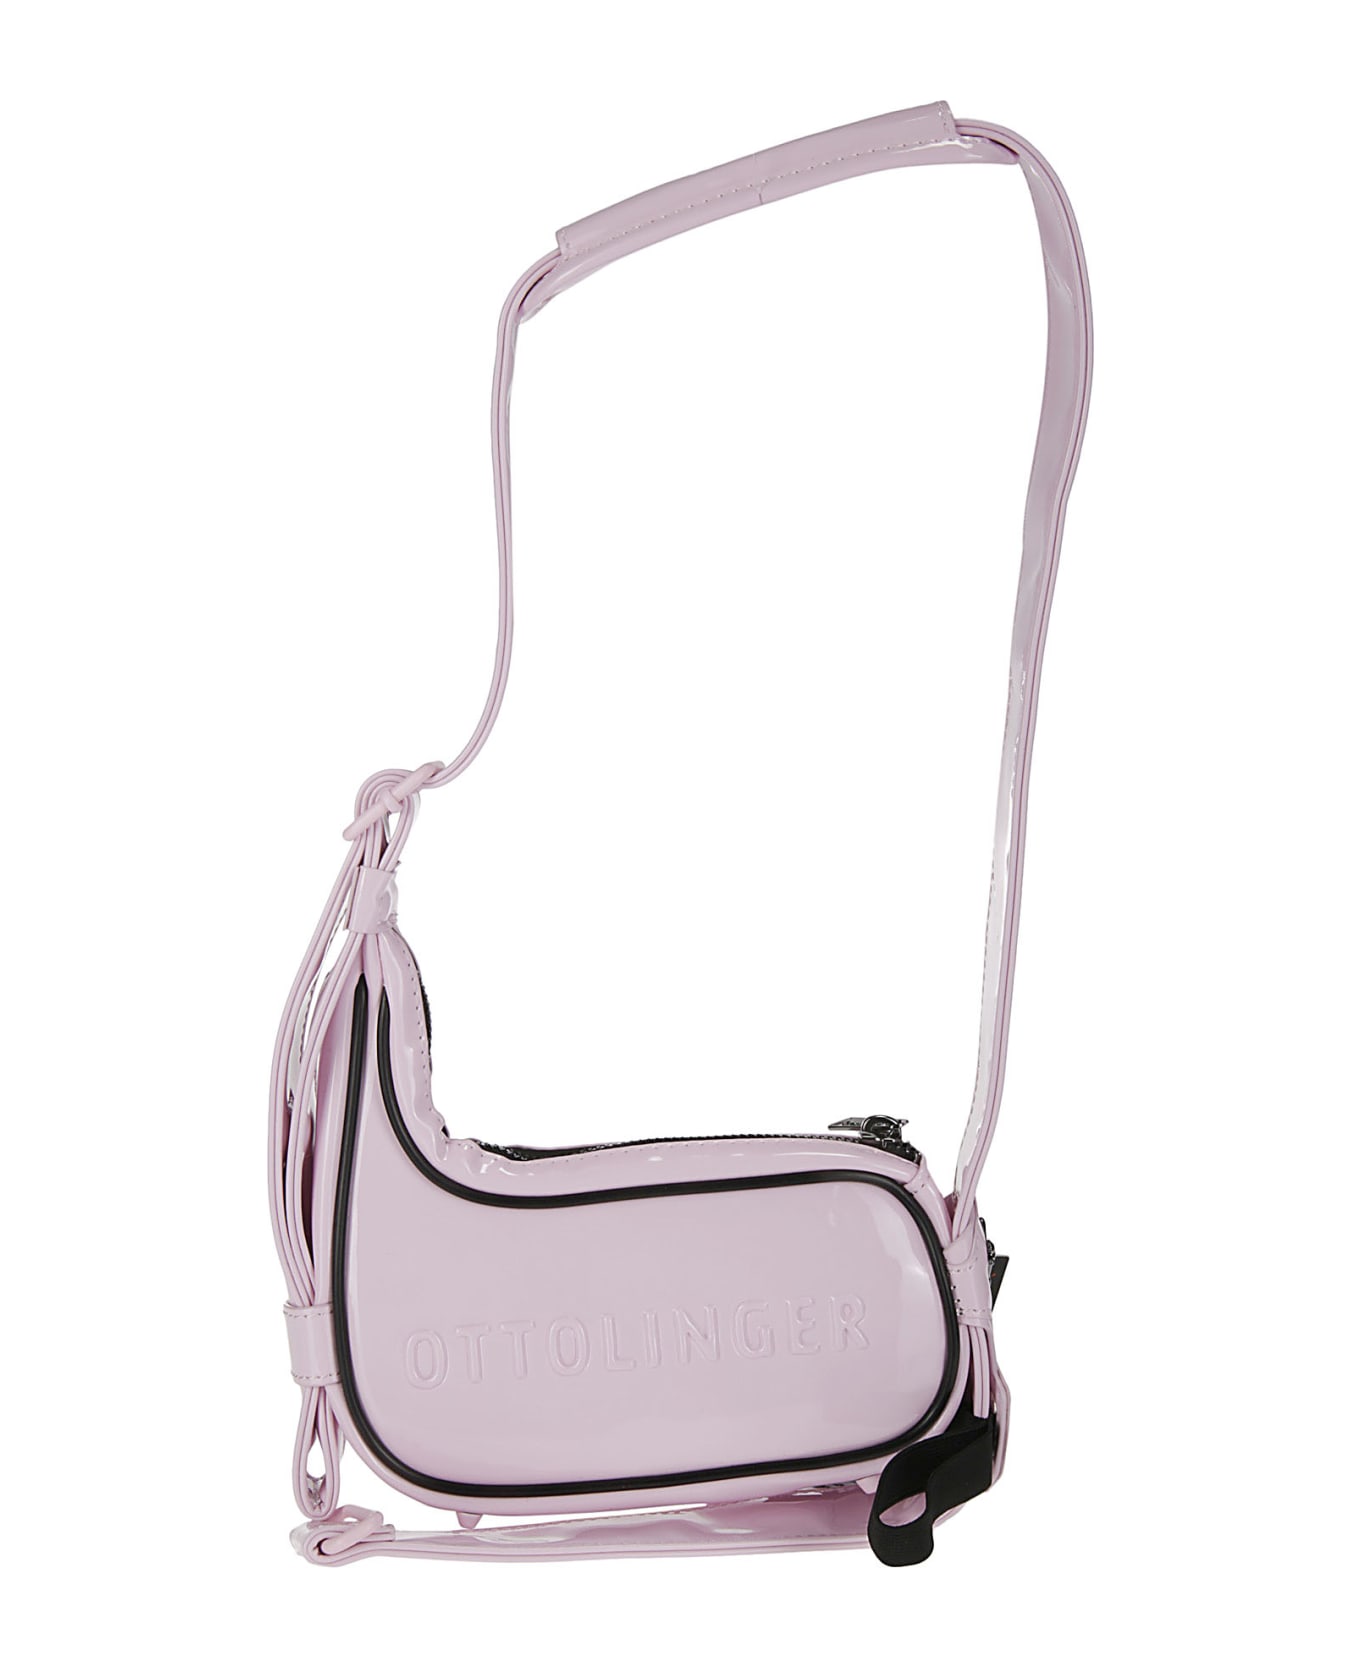 Puma X Ottolinger Small Bag - WHISP OF PINK